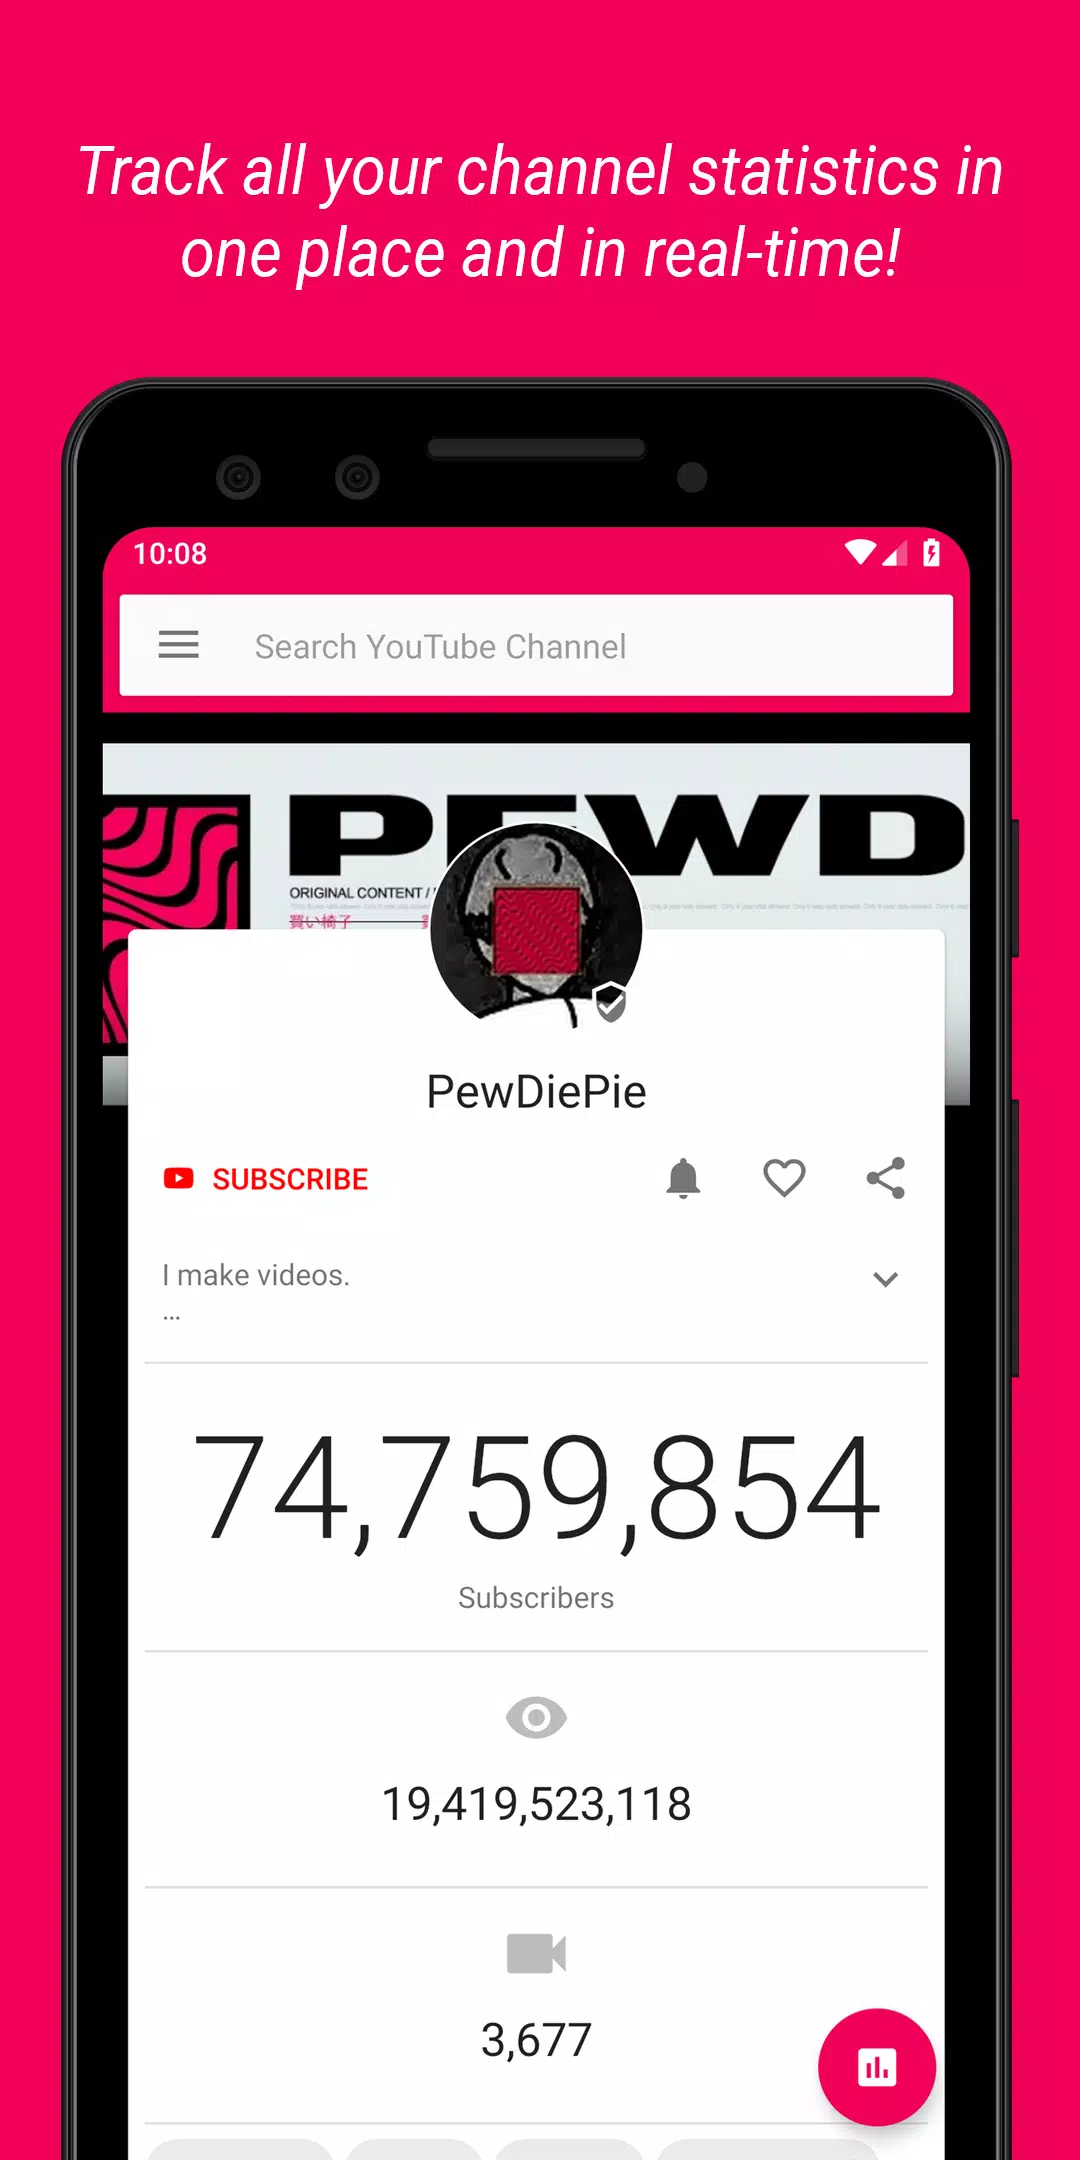 How To Setup A Live Subscriber Count! 